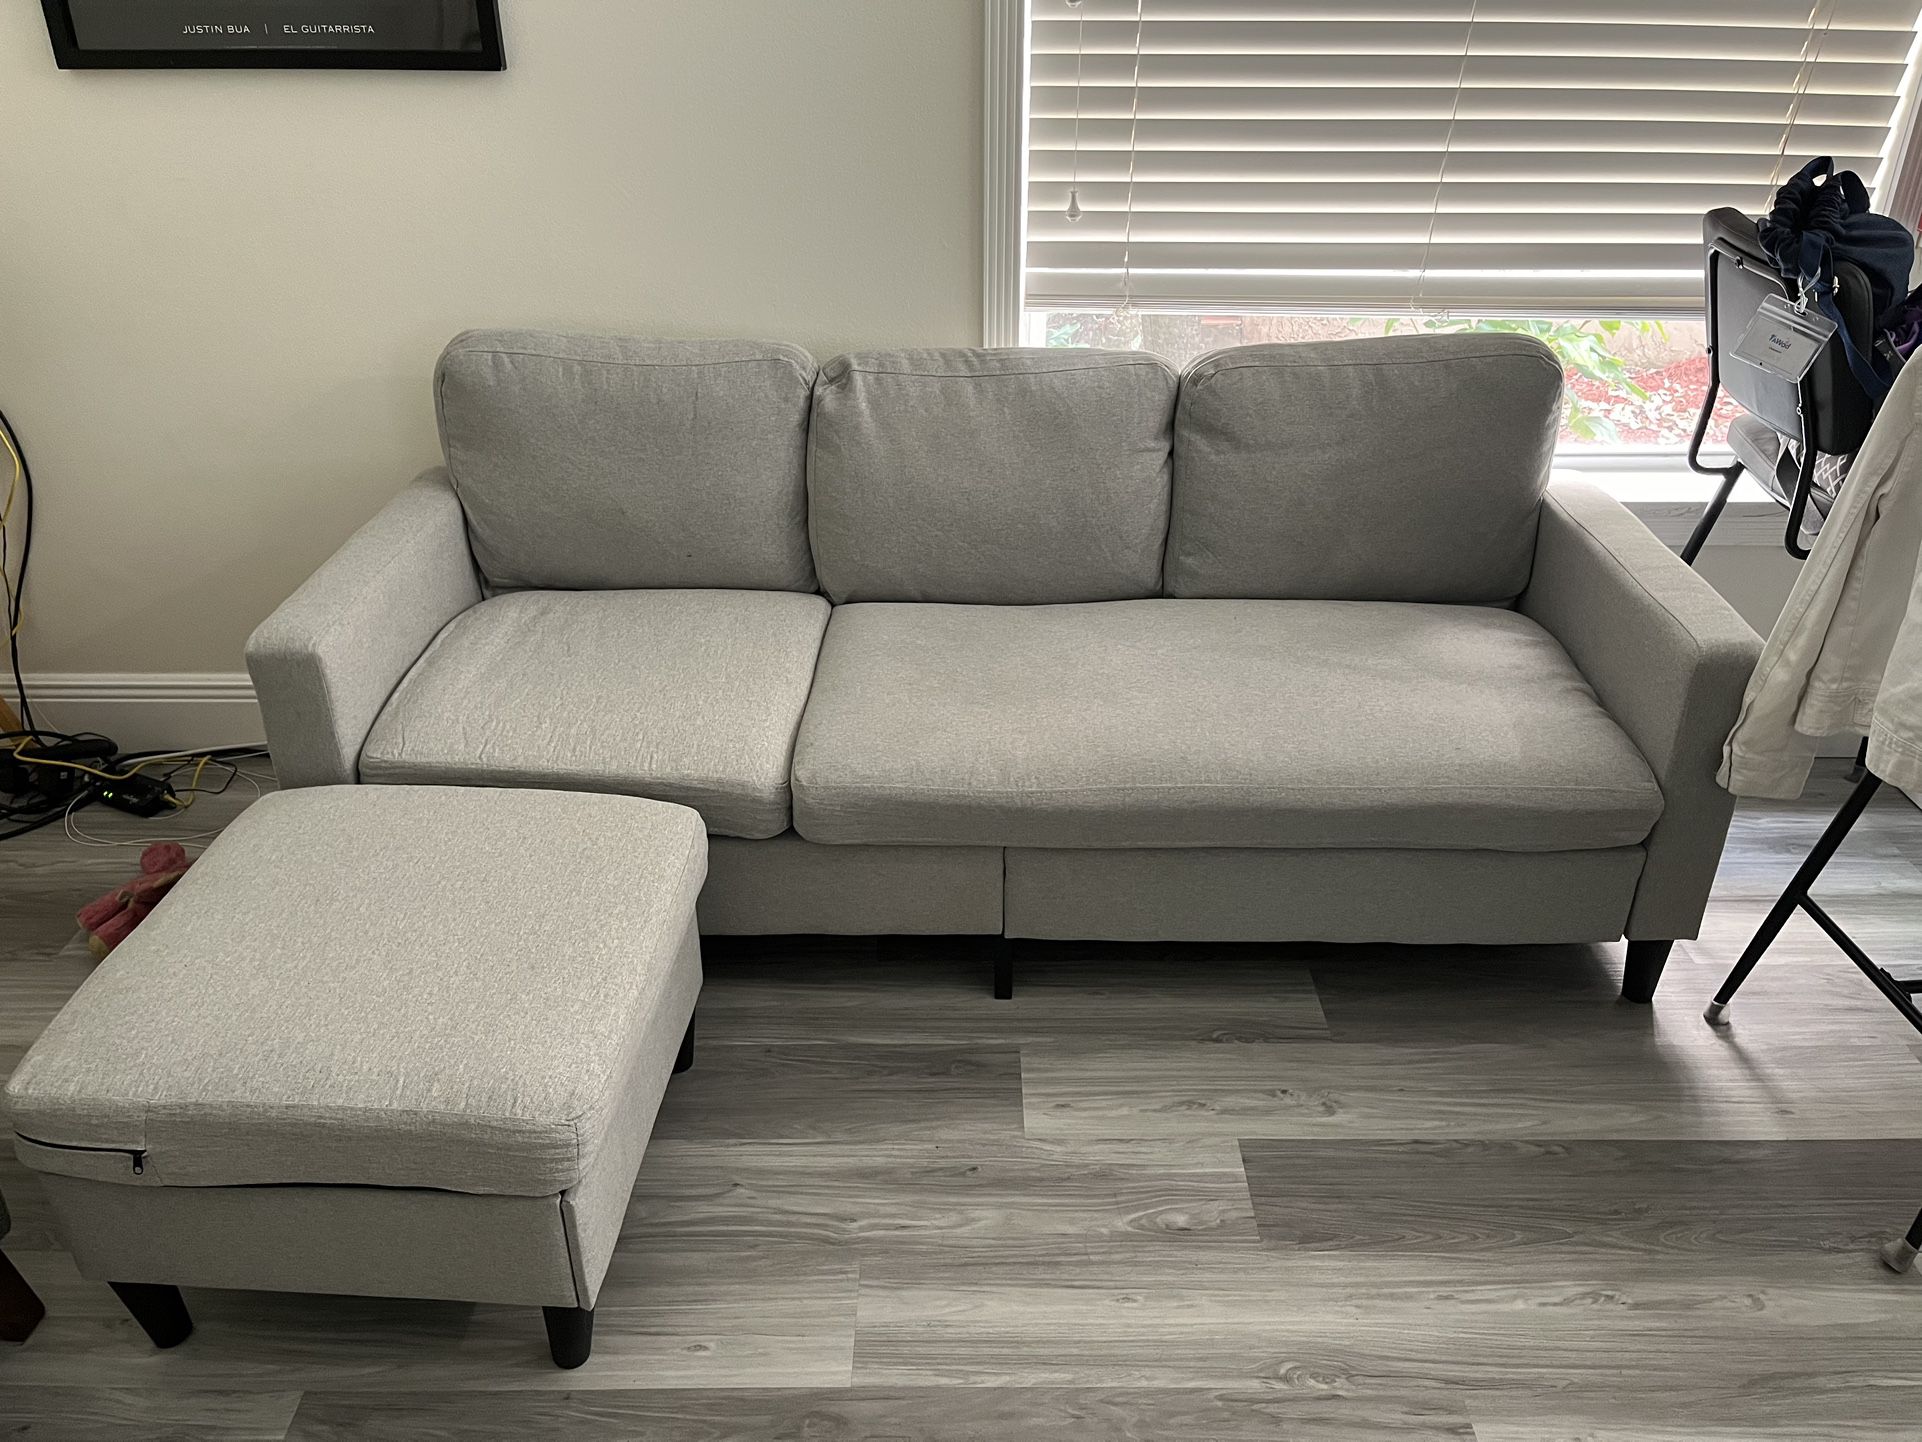 Light Grey 3 Seater Couch 